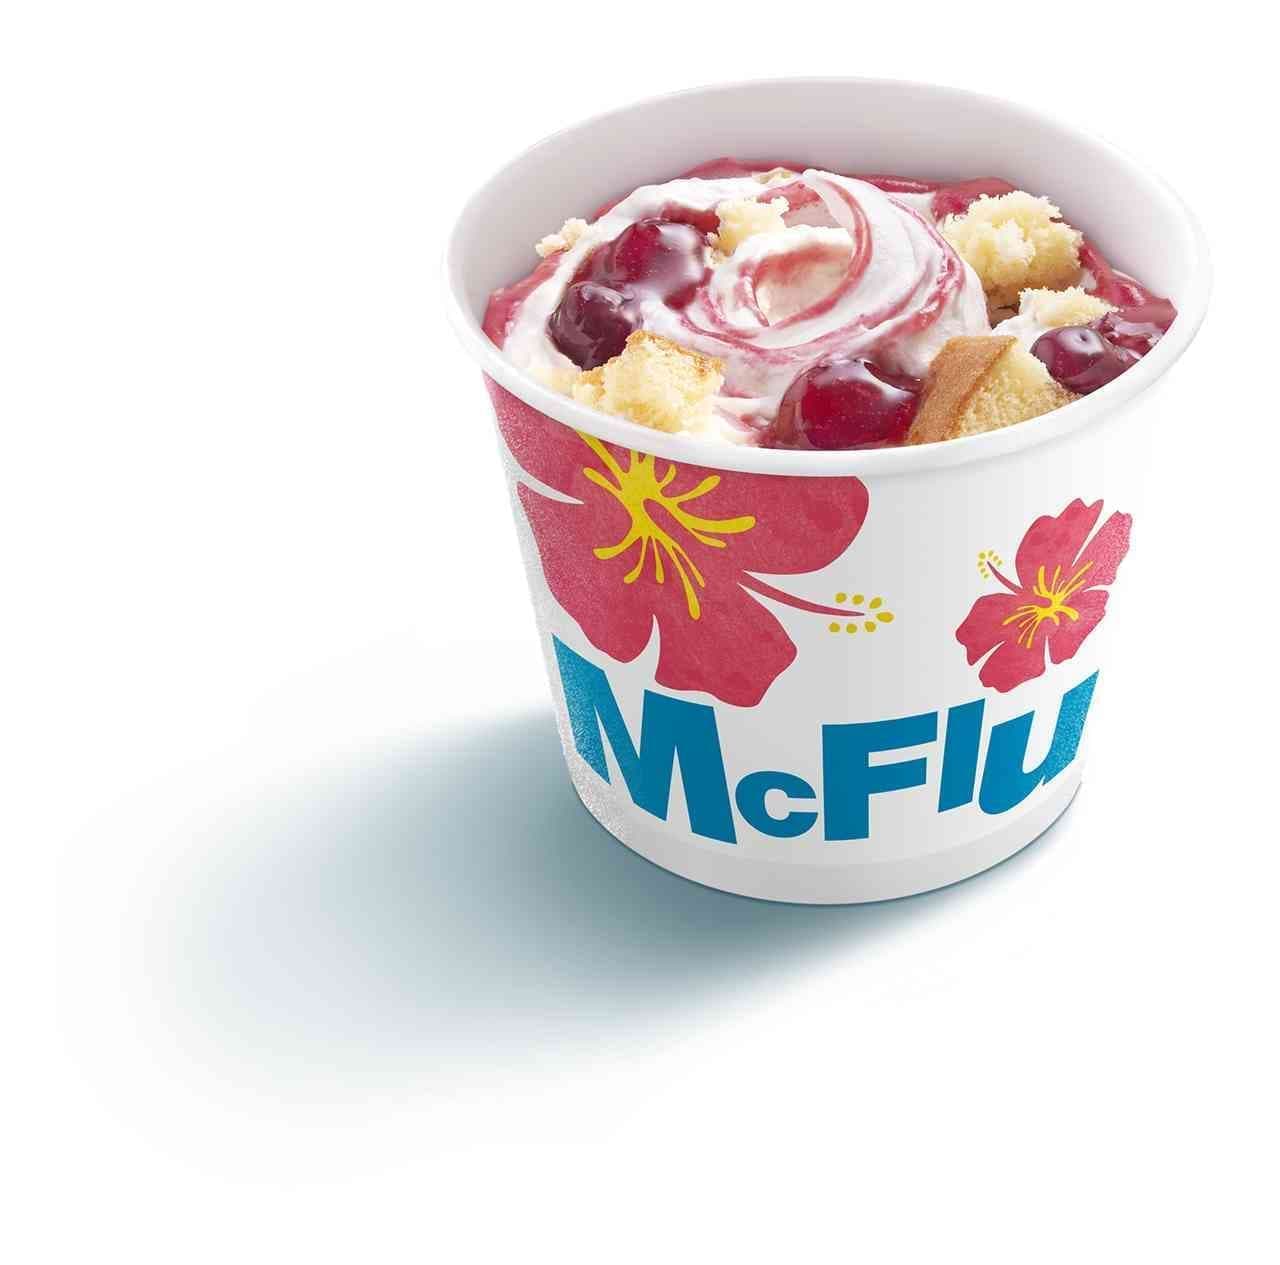 McDonald's "Hawaii! All Together" McFlurry Mixed Berry Pancake Style